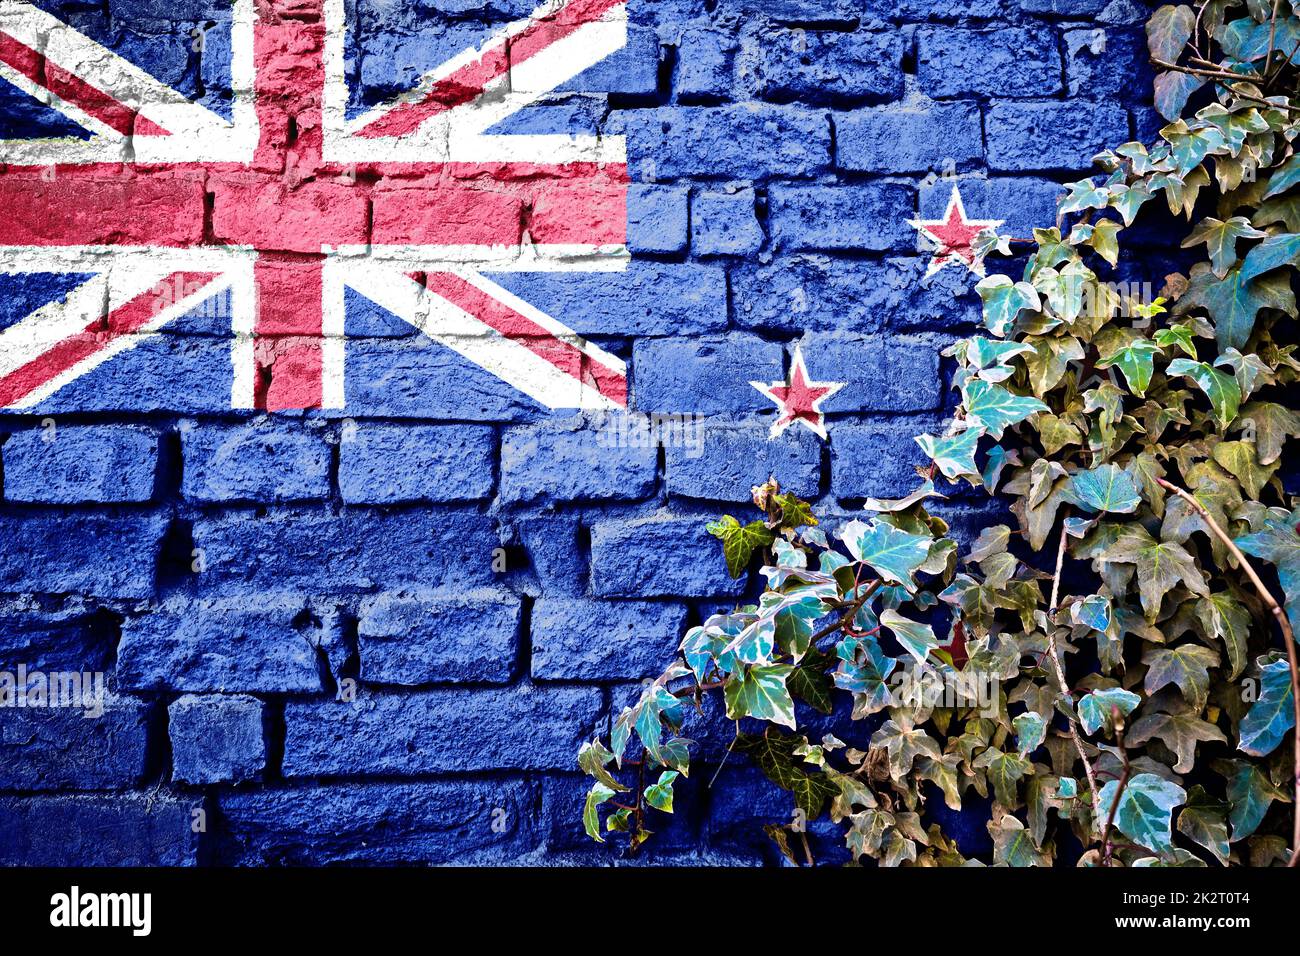 New Zeland grunge flag on brick wall with ivy plant Stock Photo